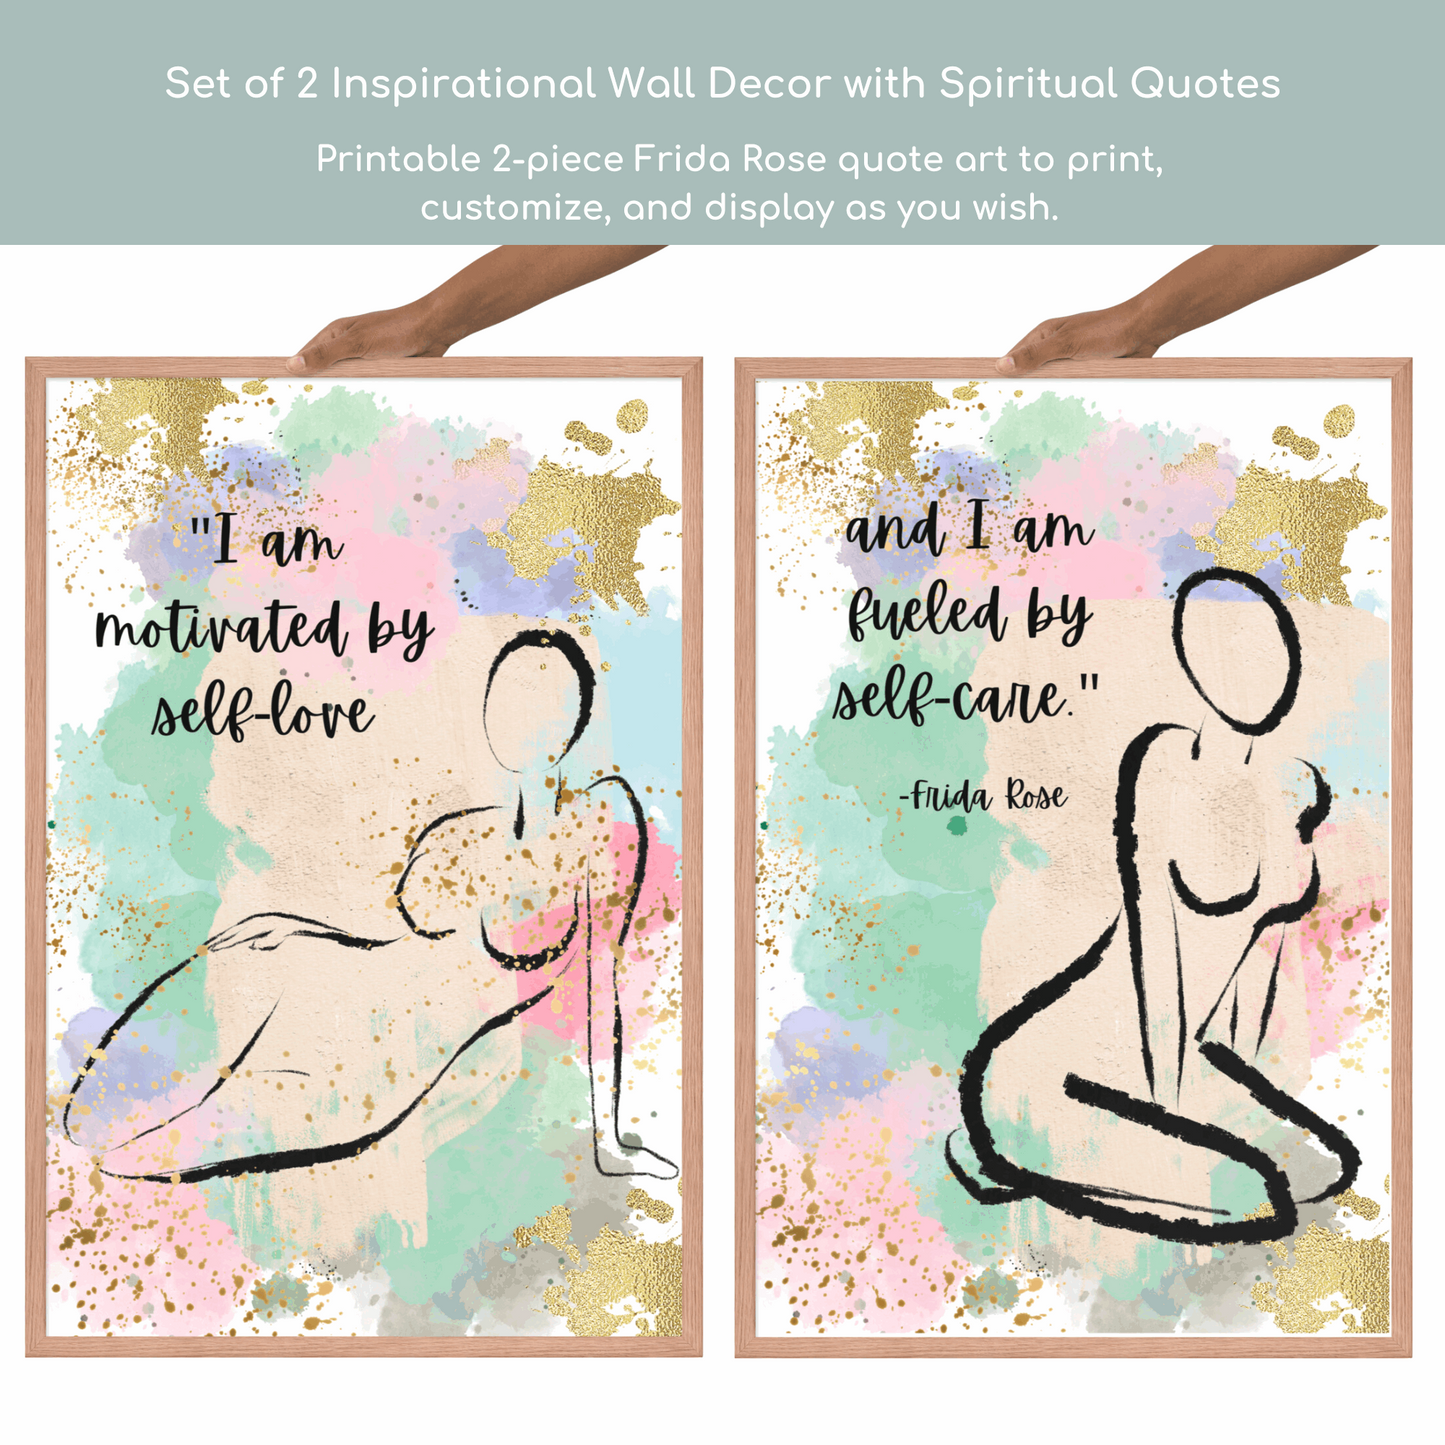 Set of 2 Inspirational Wall Decor with Spiritual Quotes